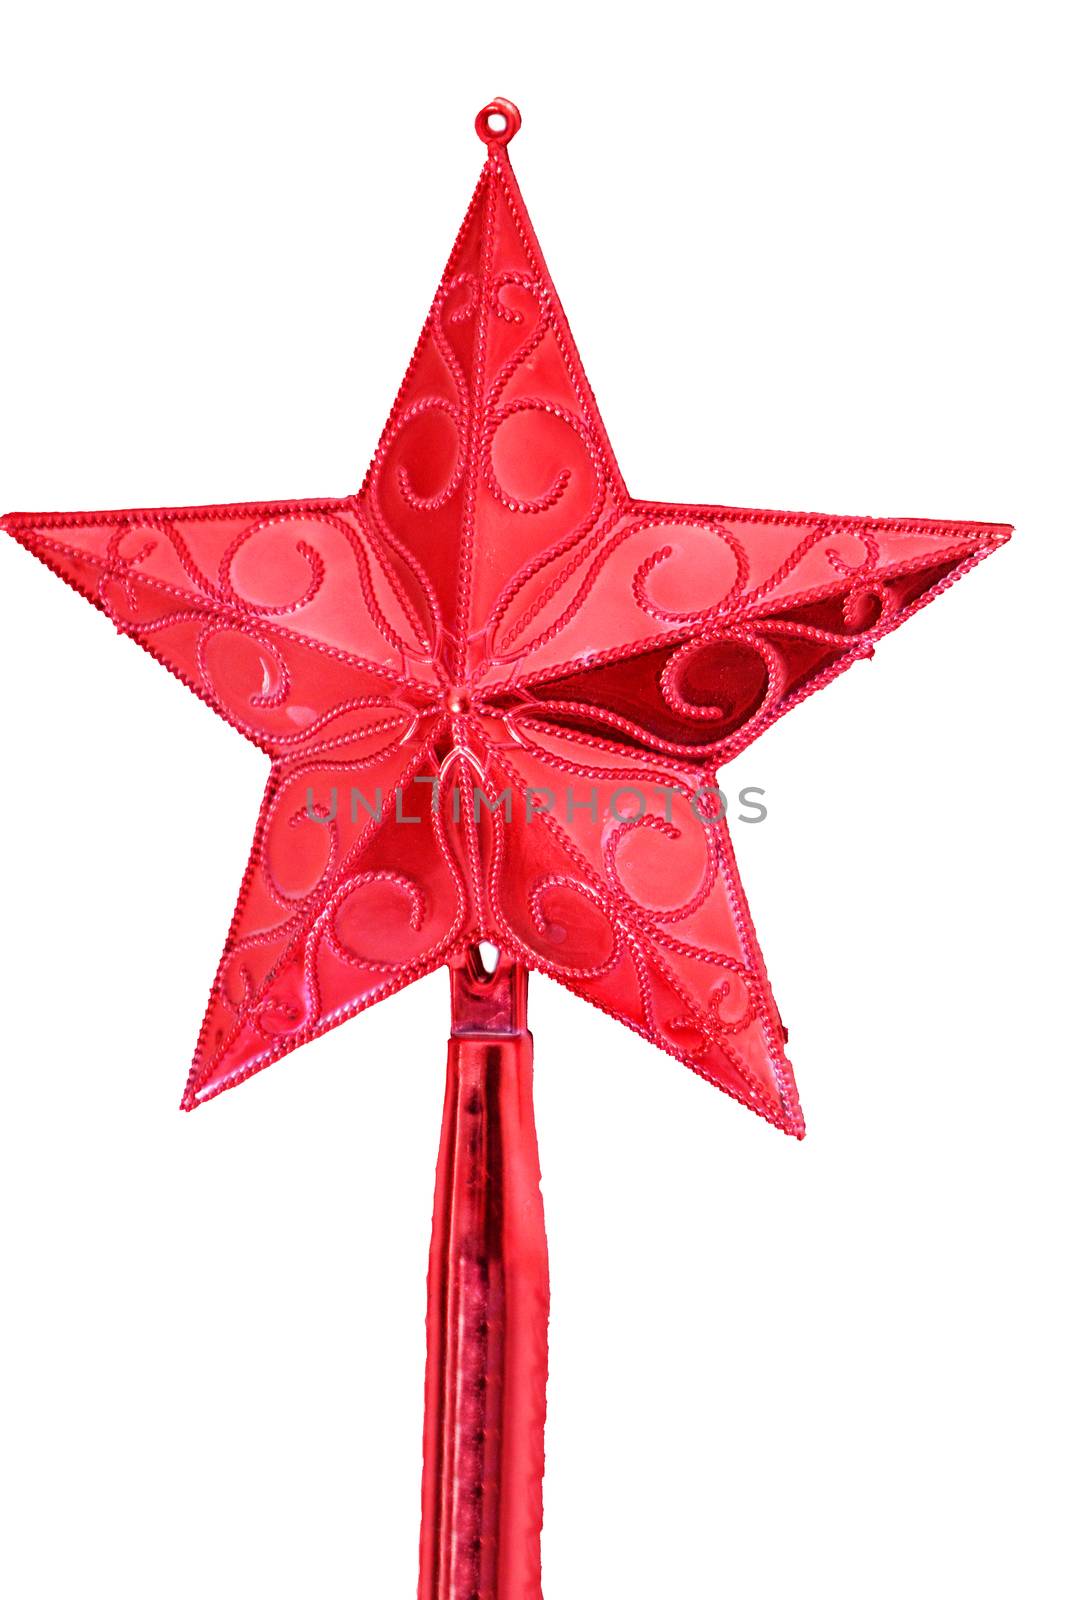 Shining red star set high up on white christmas tree. No people